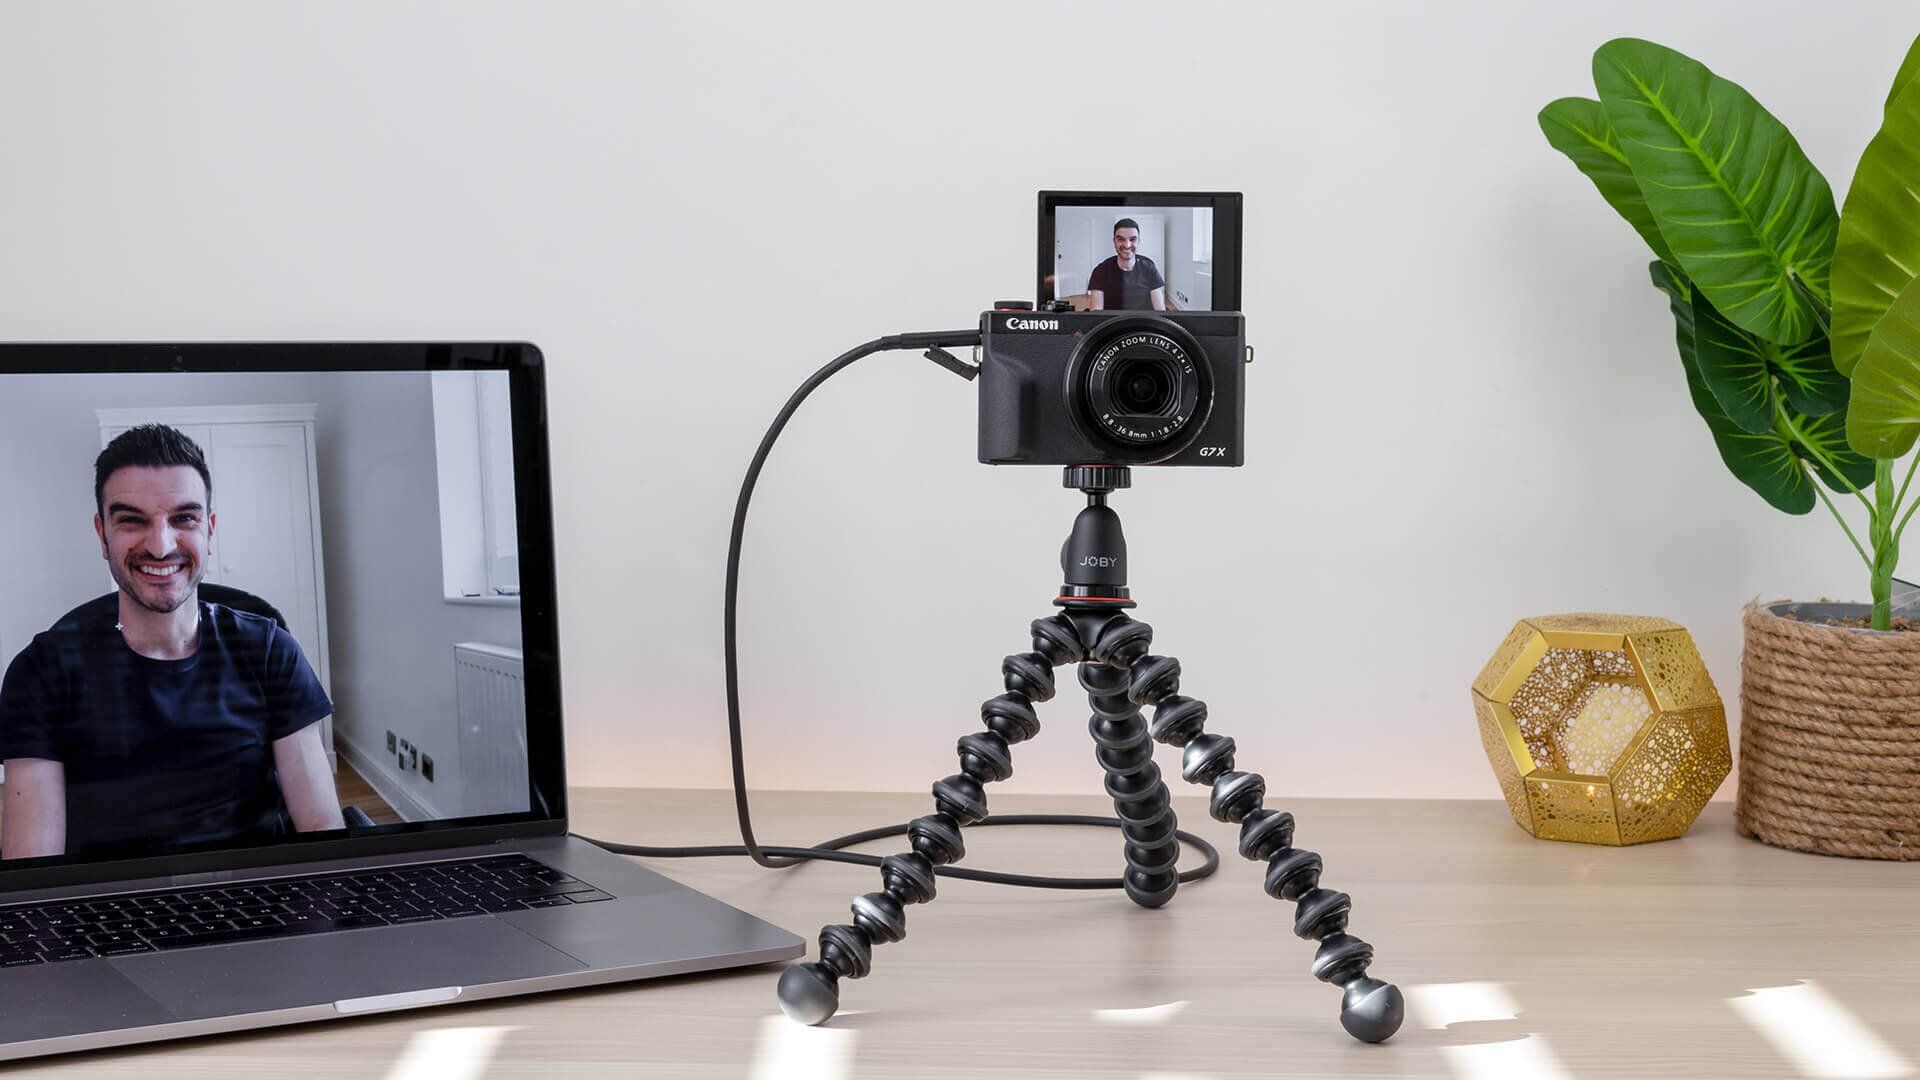 How To Live Stream Like a Pro With The PowerShot G7 X Mark III